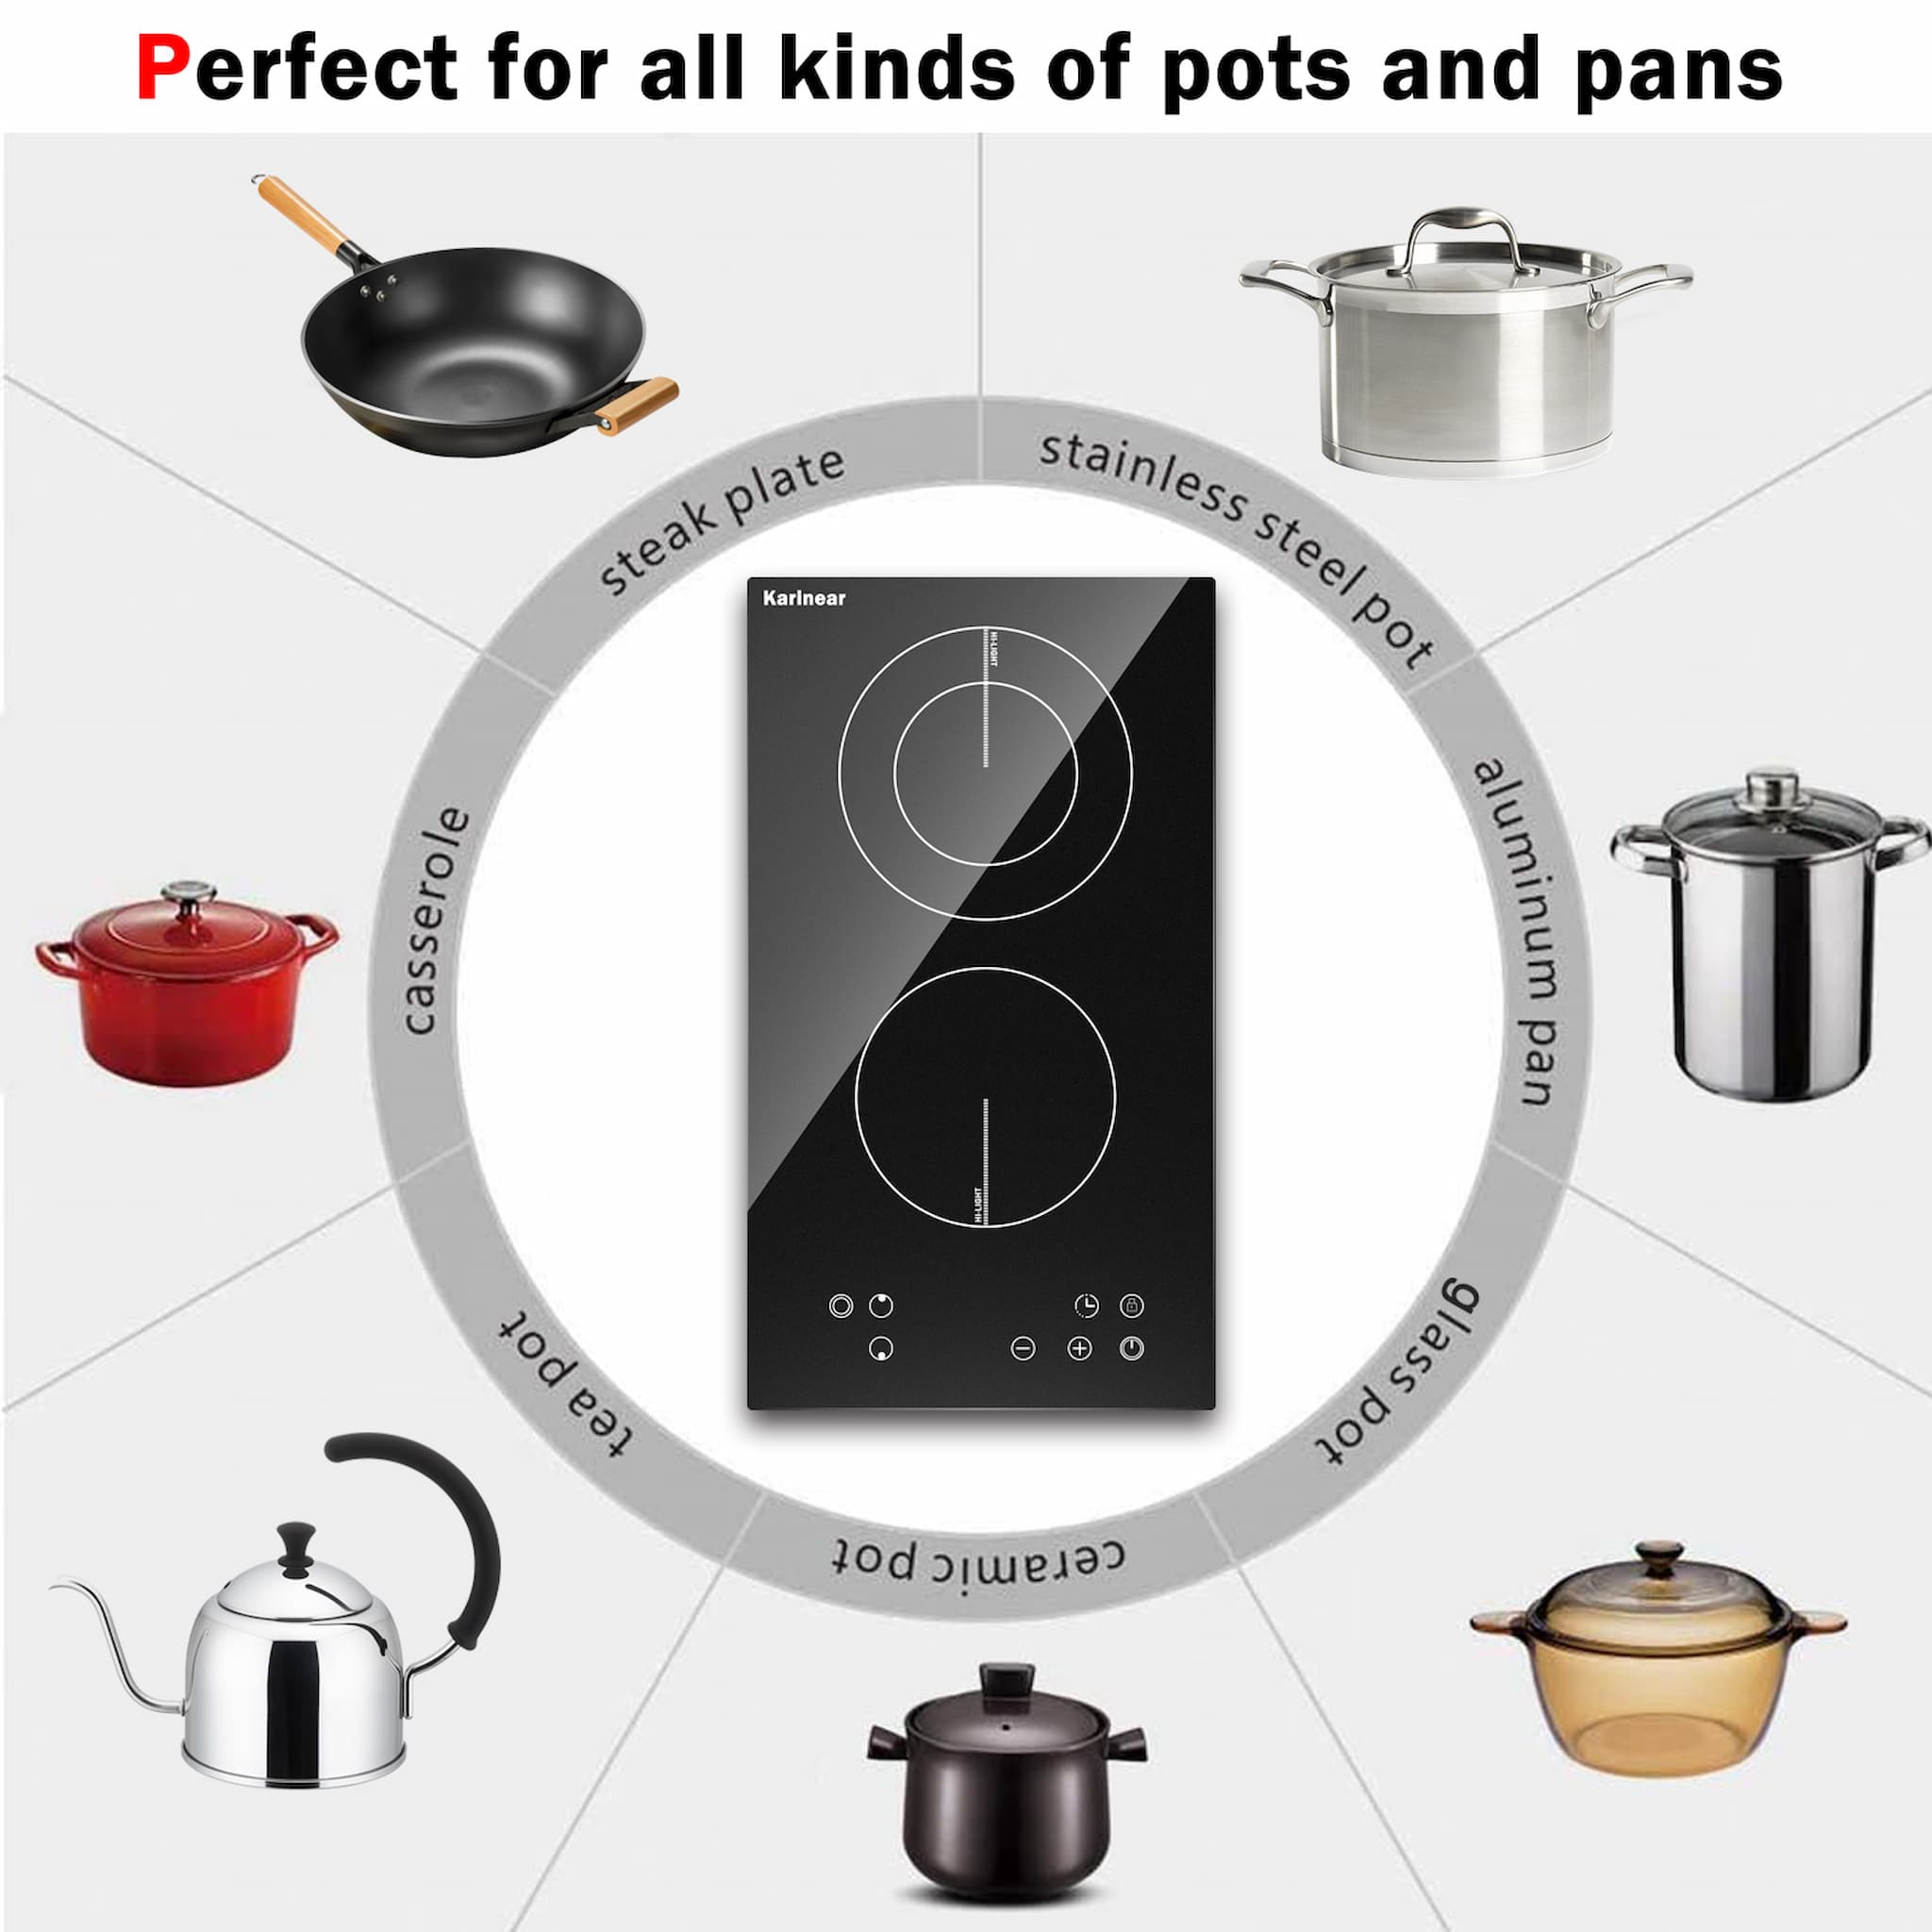 The ceramic hob is convenient that is suitable for variety of cookware, such as aluminium, stainless steel, ceramic, glass pot, copper, cast iron and so on.